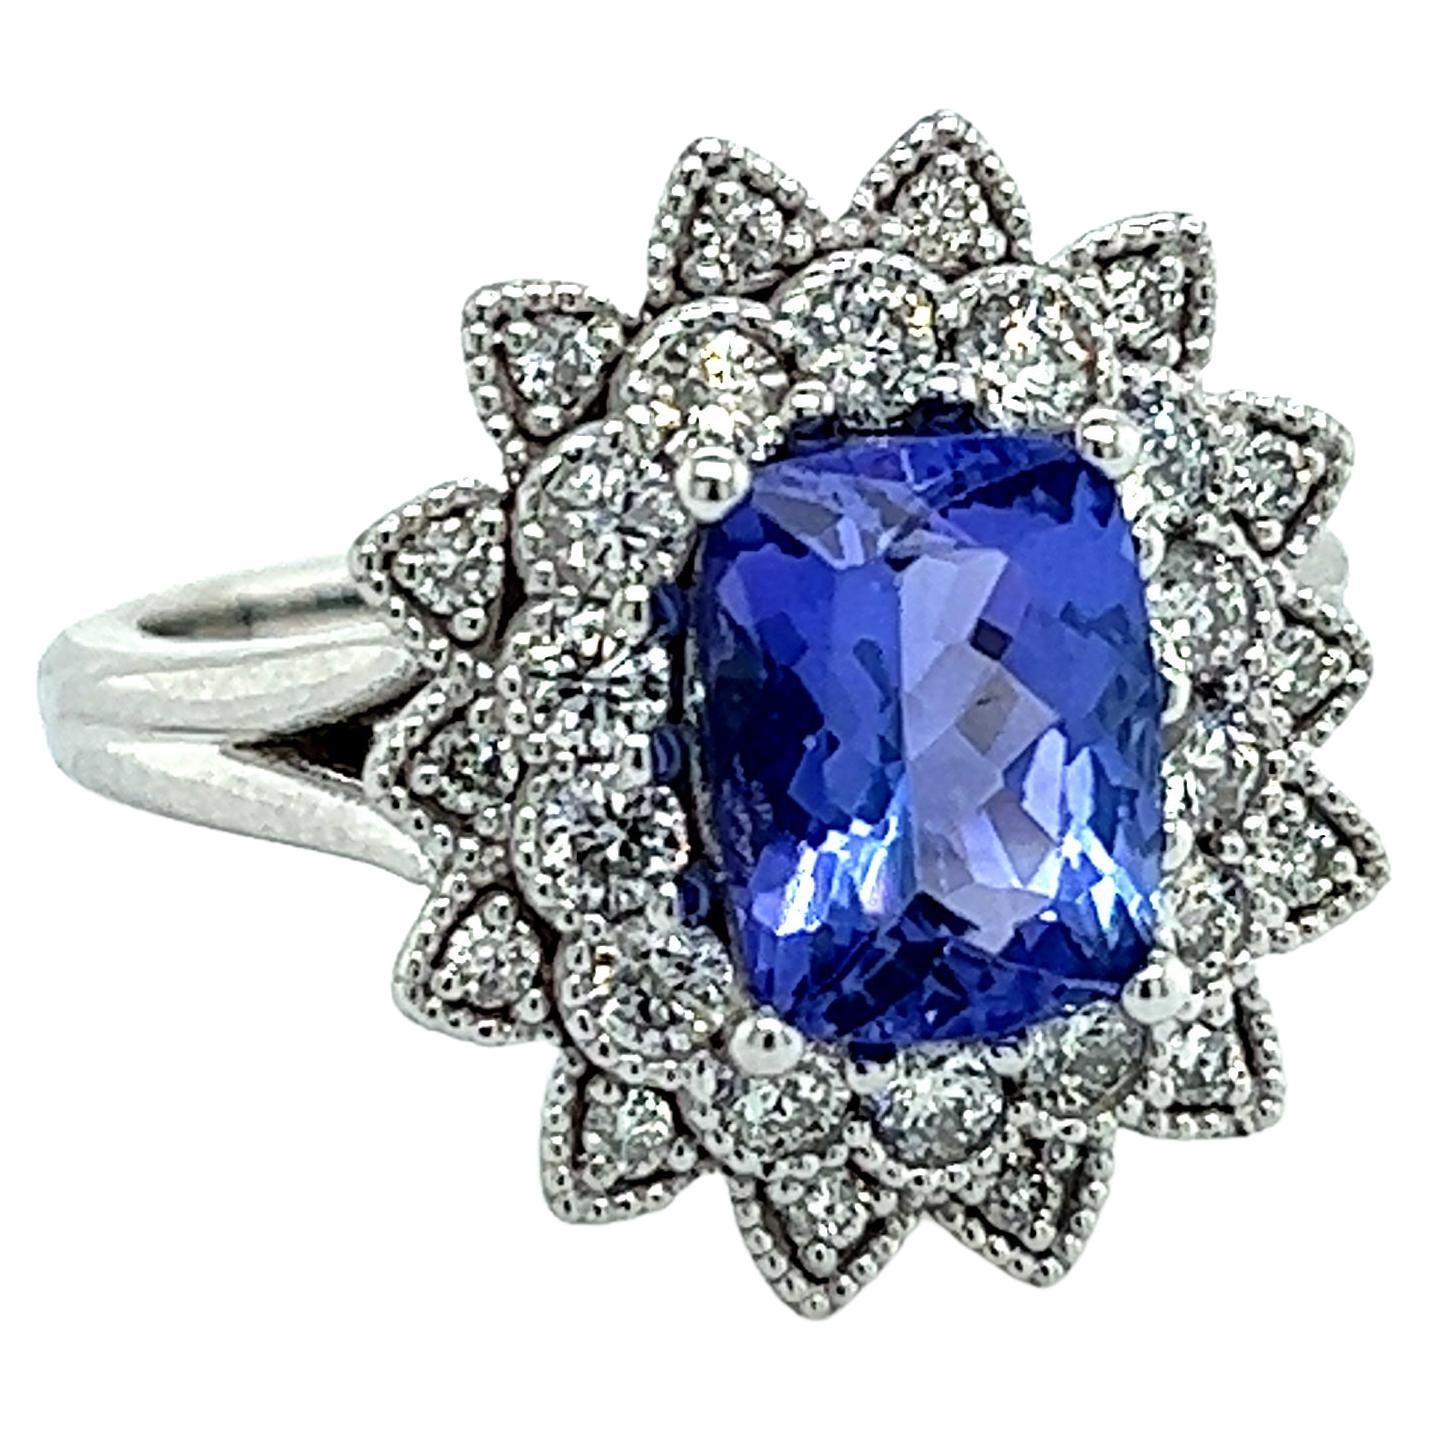 Natural Tanzanite Diamond Ring 6.5 14k W Gold 2.61 TCW Certified For Sale